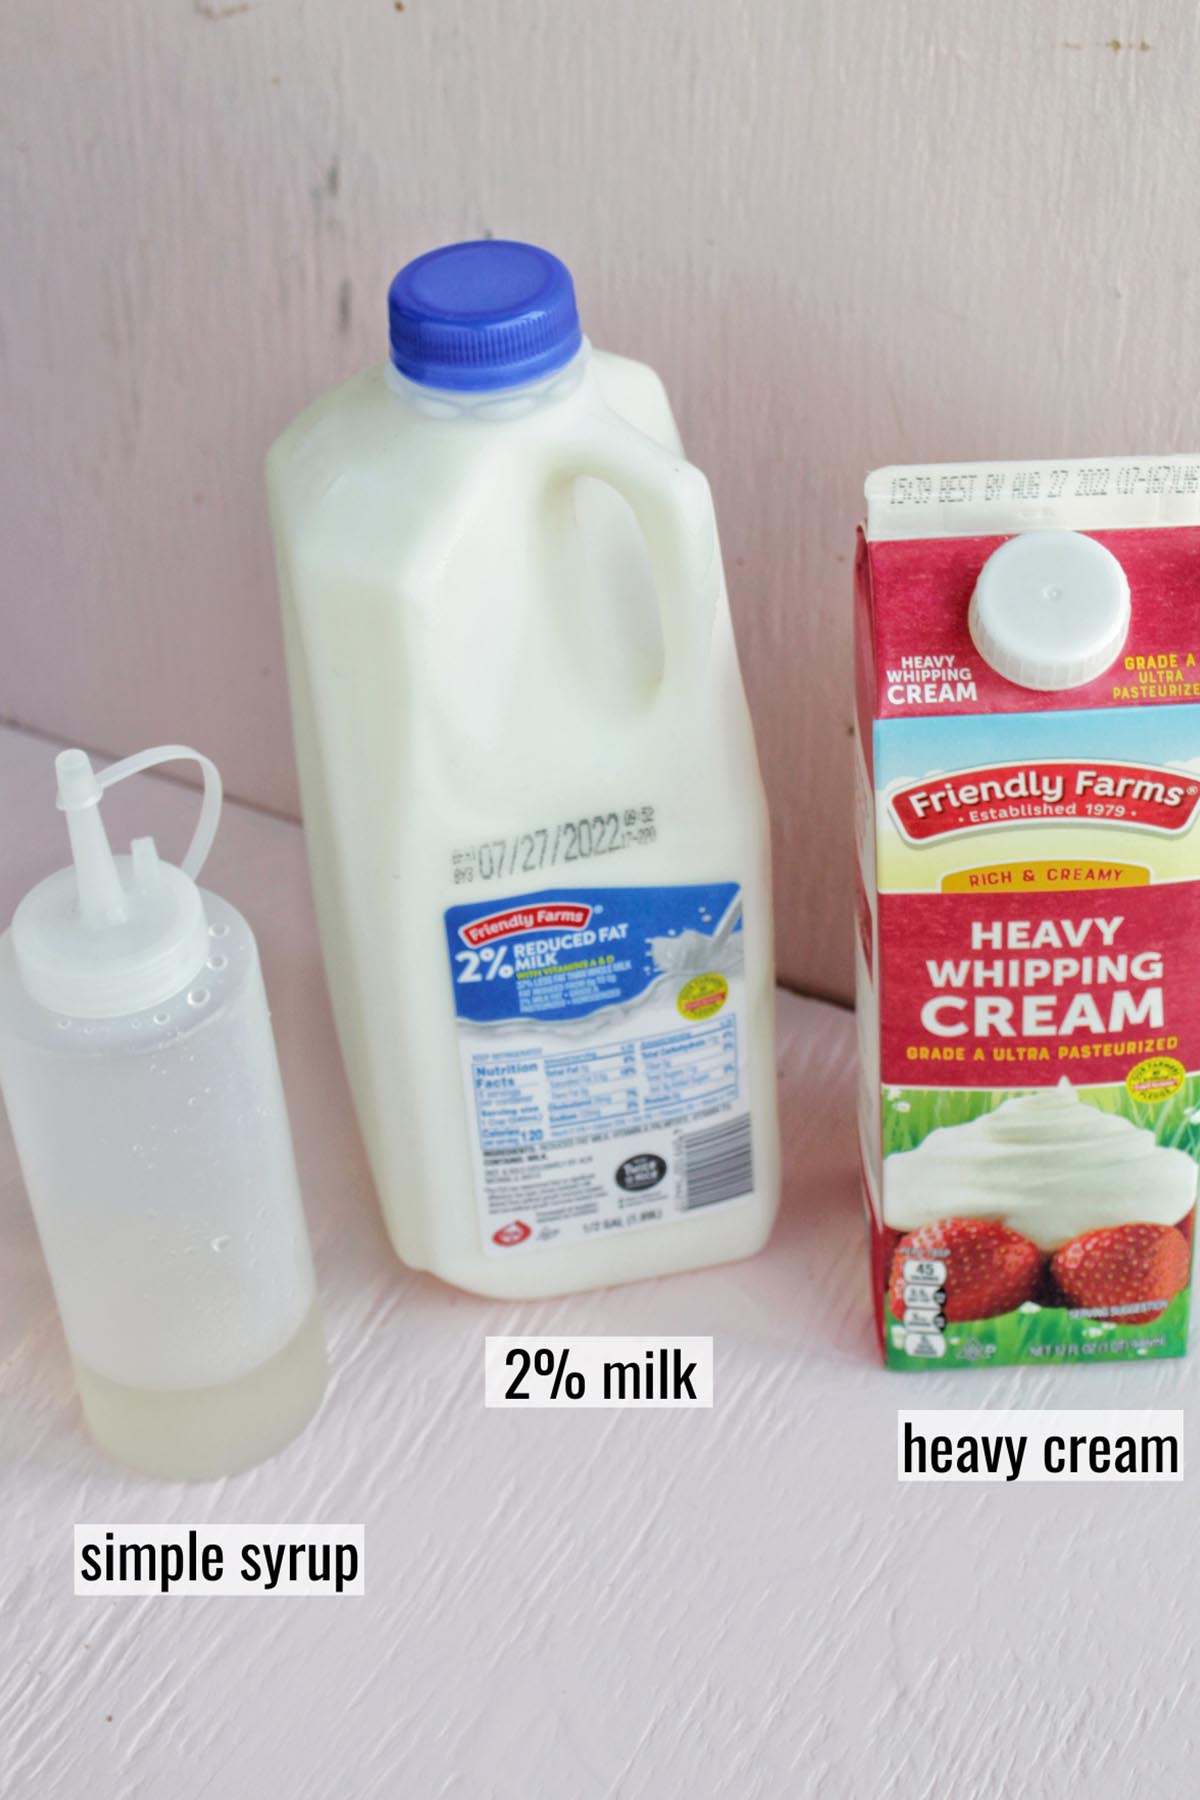 bottle of simple syrup, milk, and heavy cream with labels.